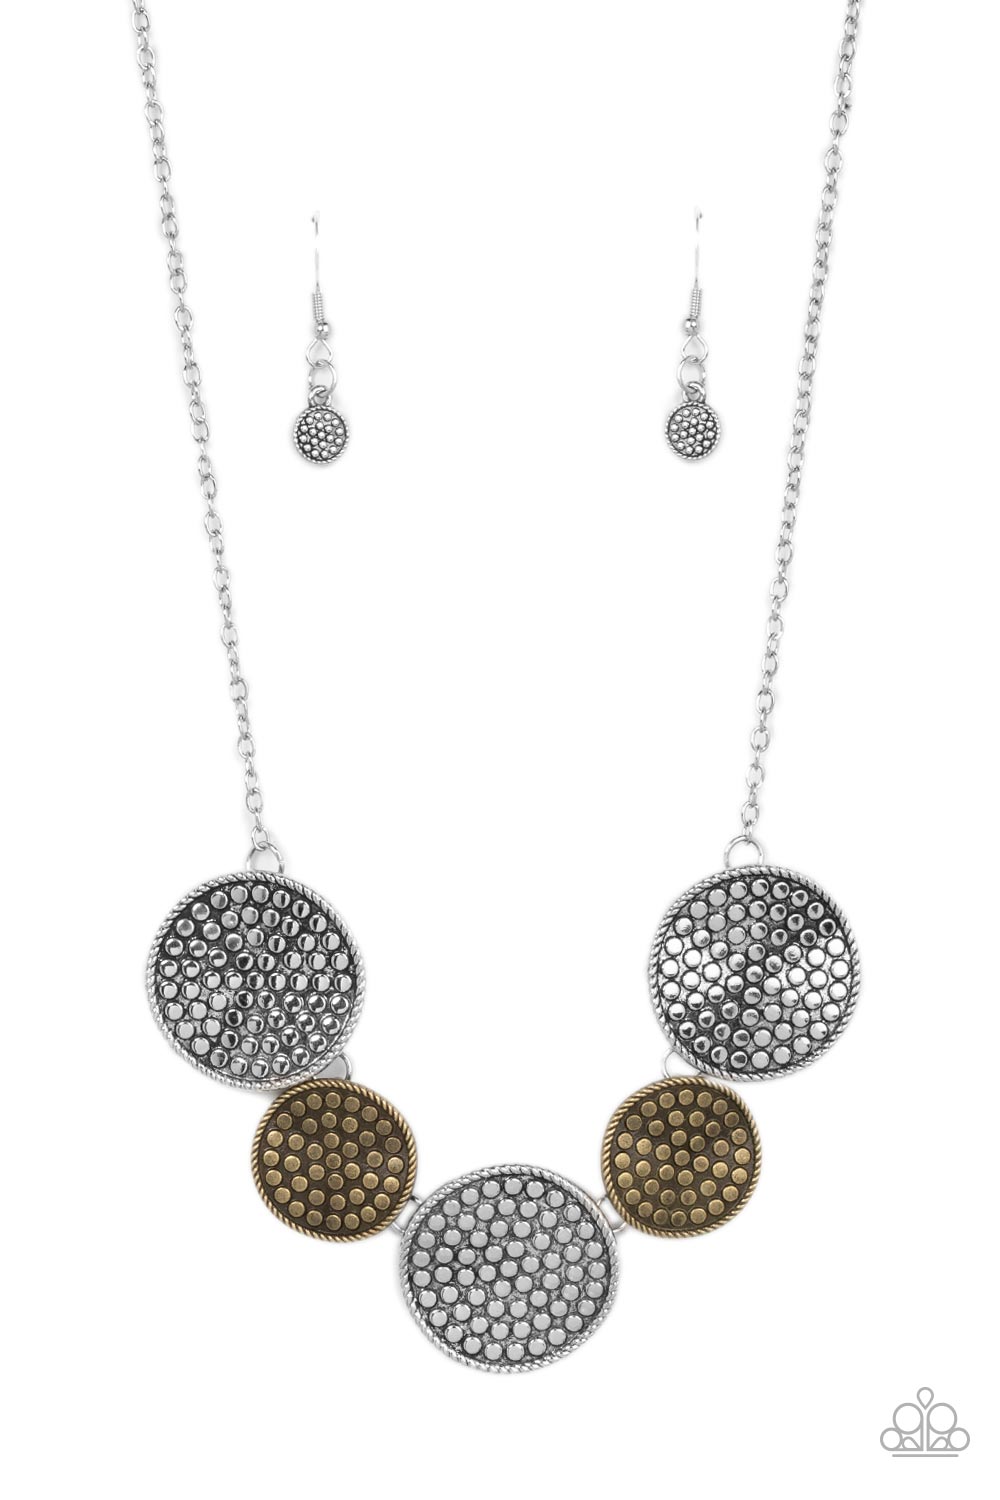 Necklace - Self DISC-overy - Multi